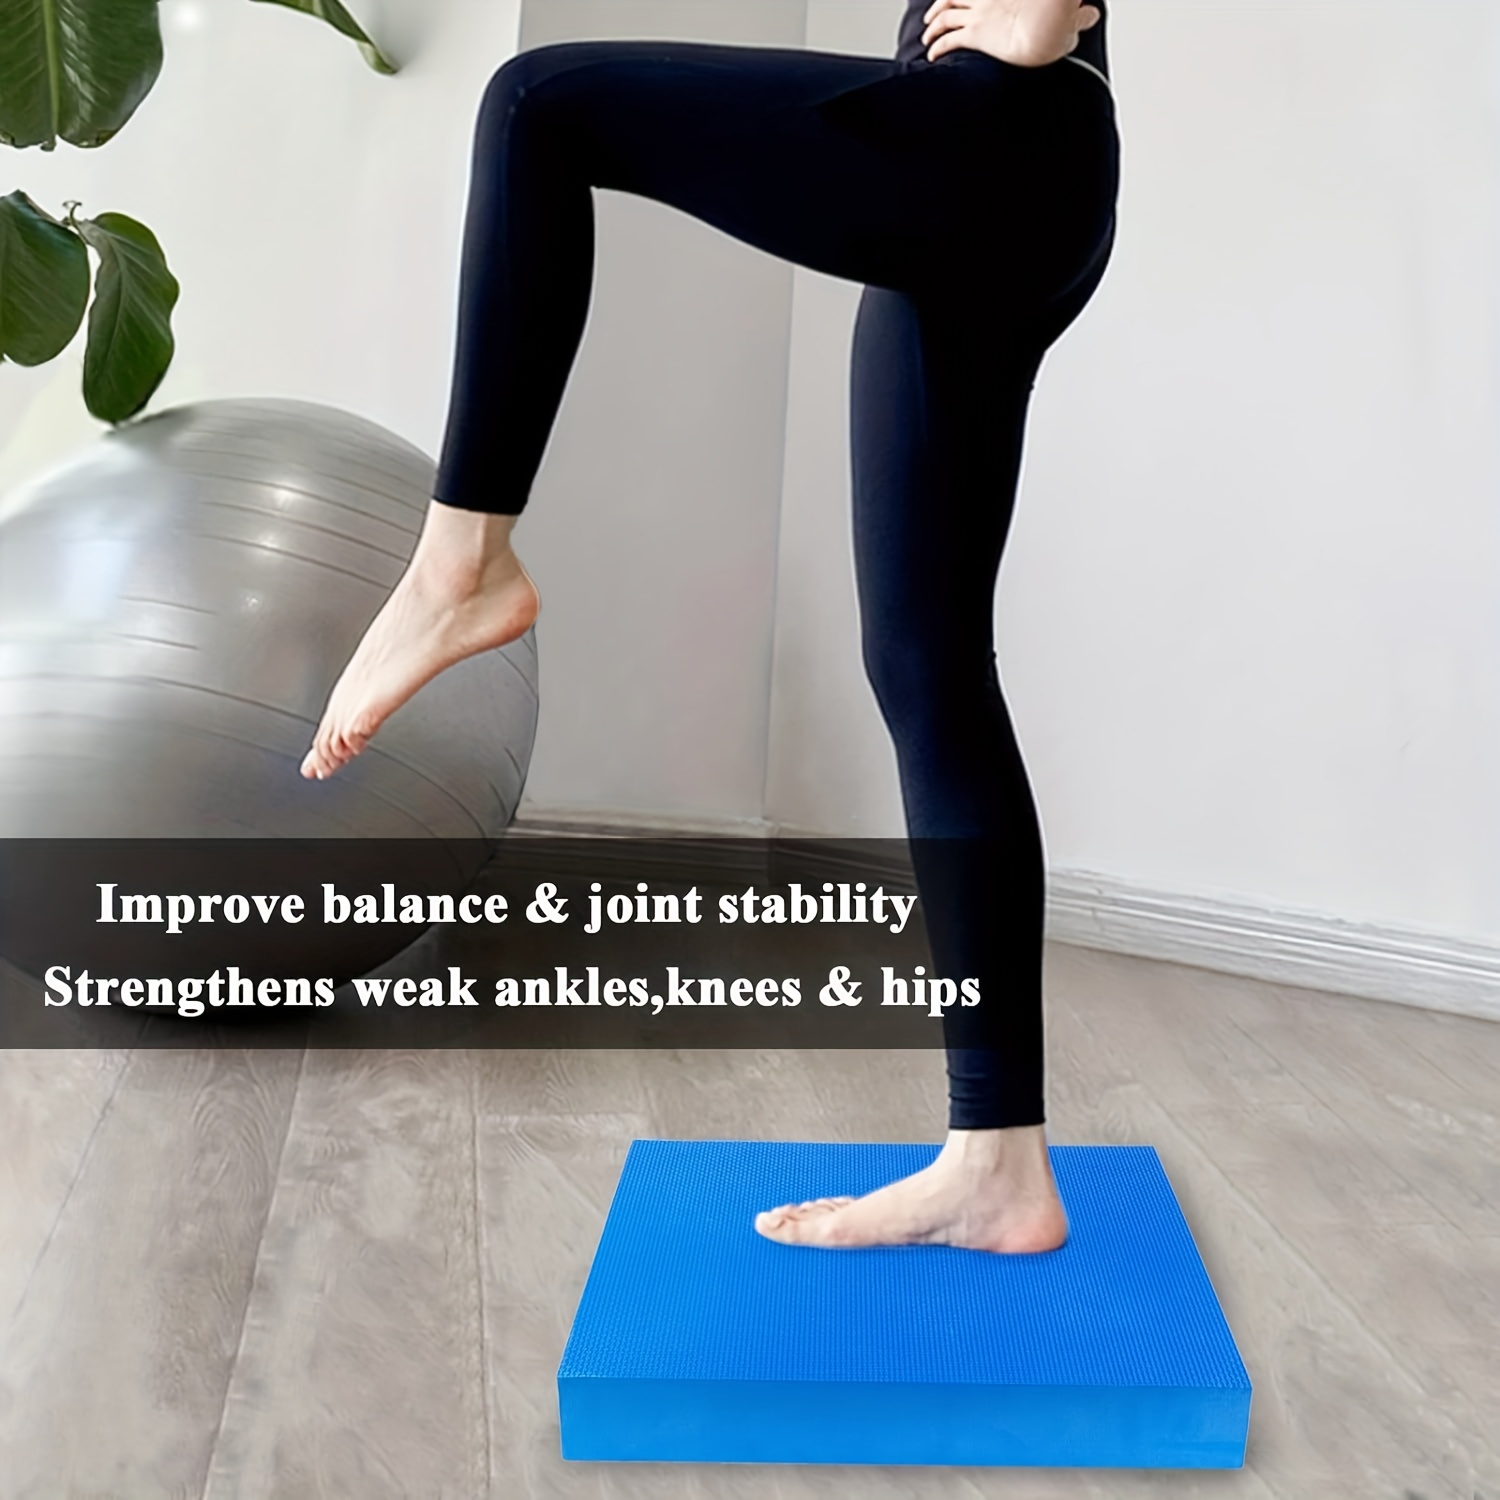 Small Balance Board, Exercise Balance Pad, Yoga Mat Thick, Non-Slip Foam  Pad, Yoga Mats for Balance Exercise Stability Workout, Knee Pads Trainer  for Physical Therapy Strength Training Ankle Exercises in Bahrain